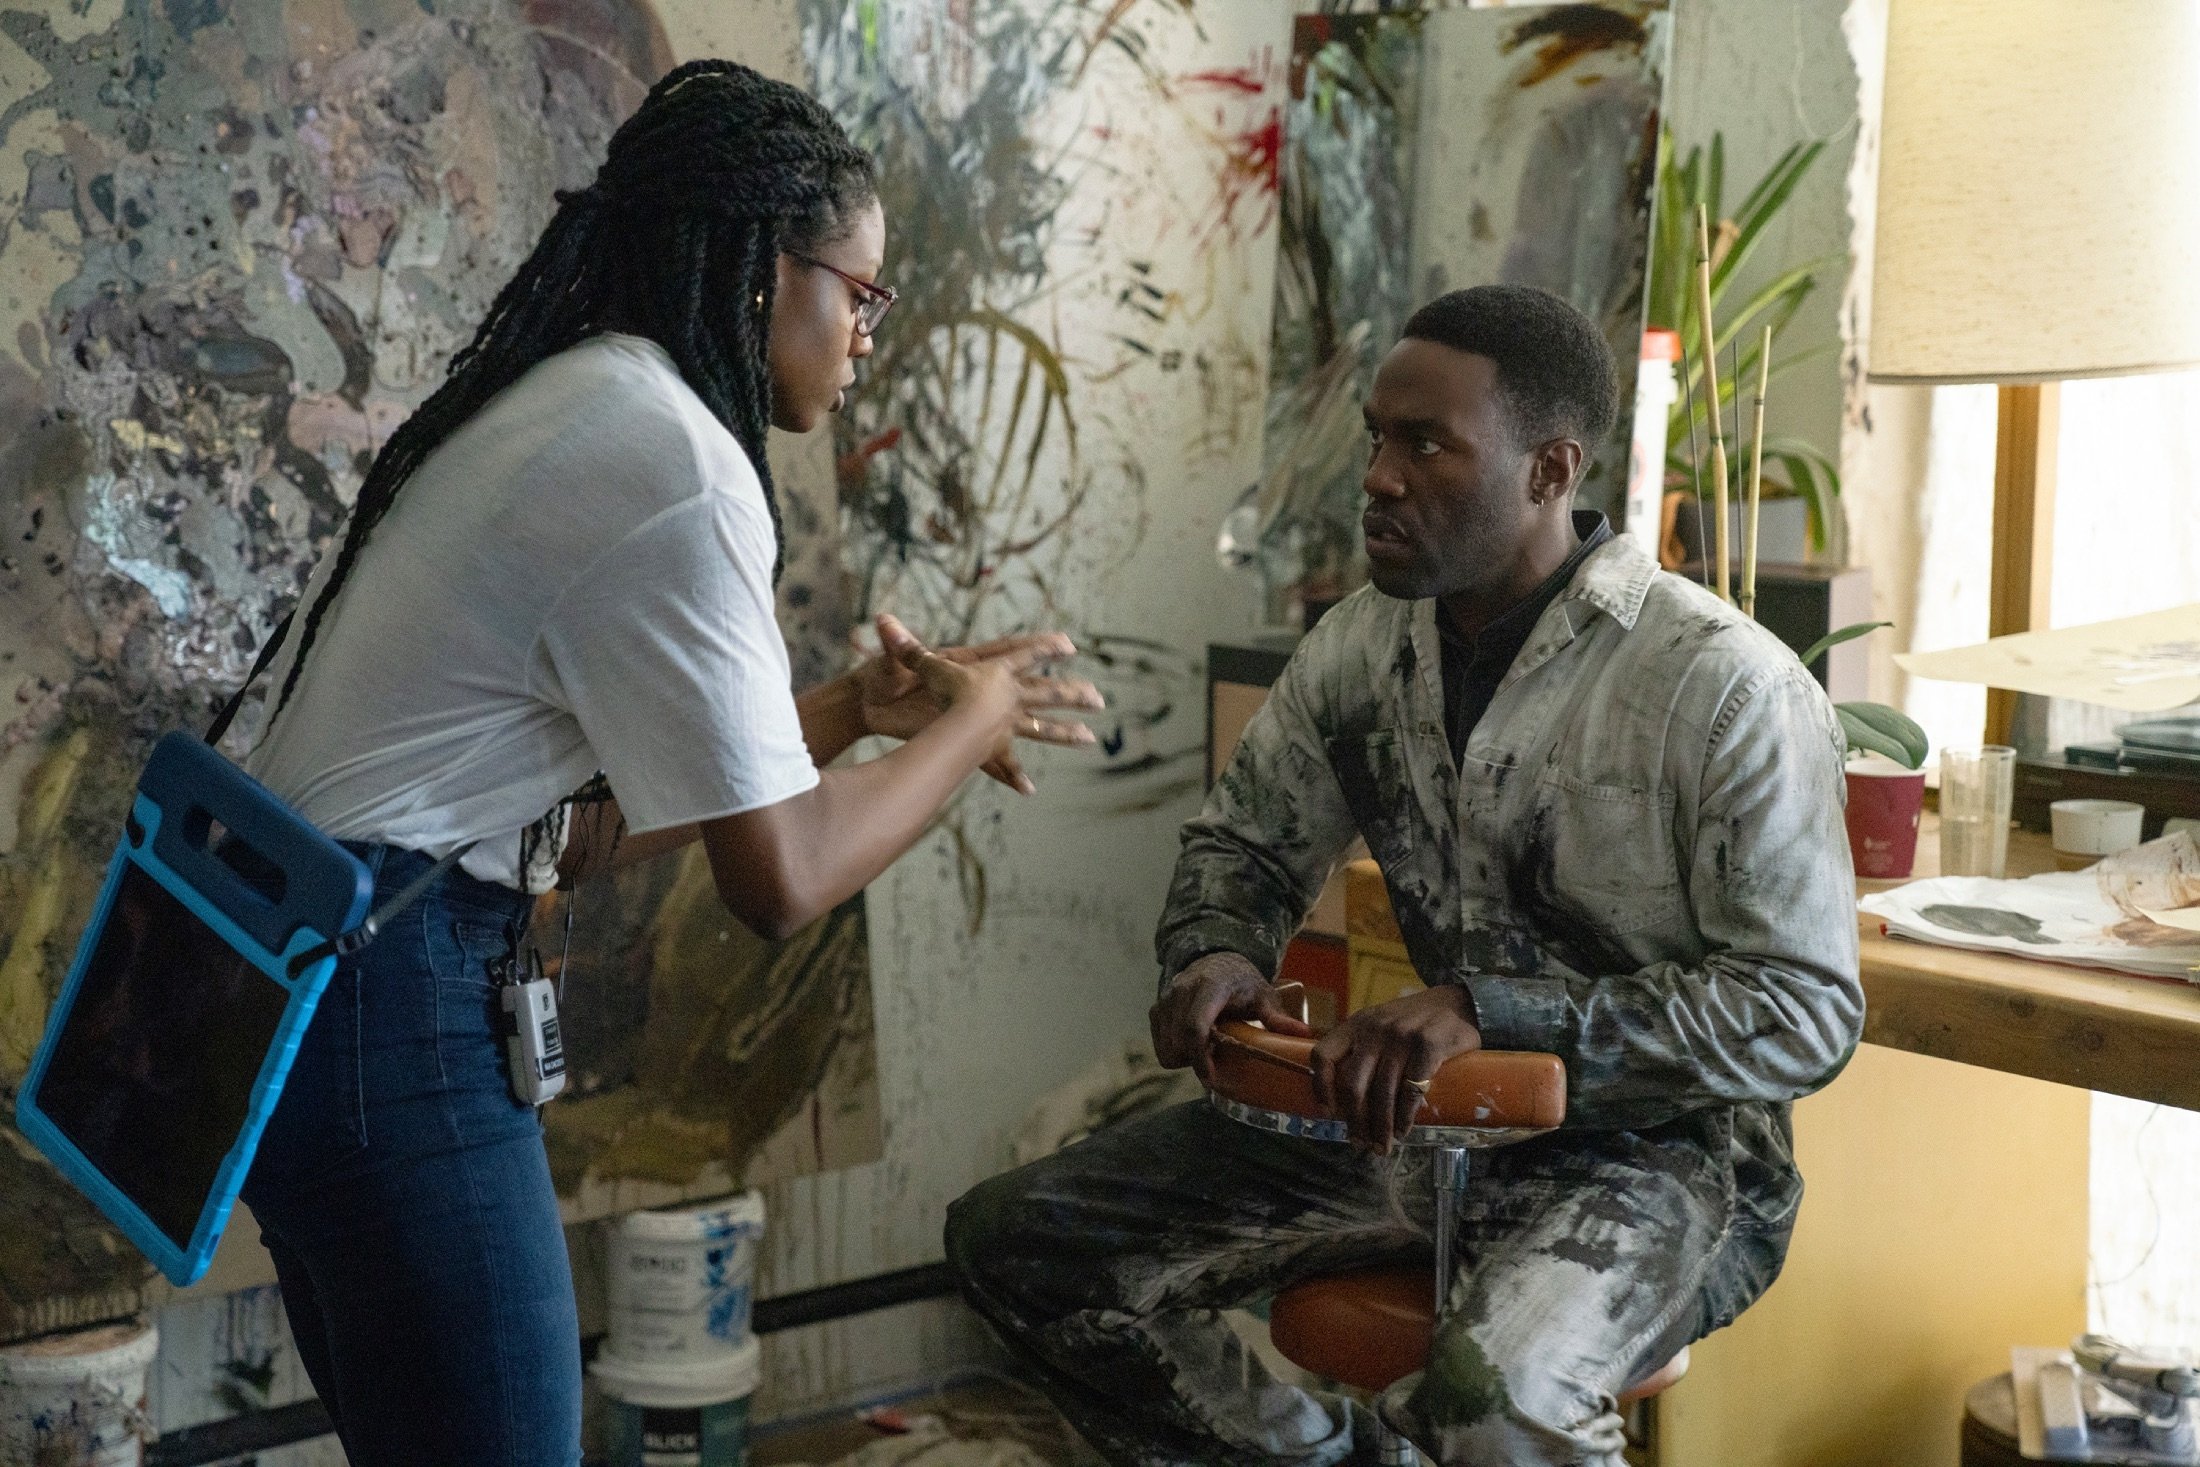 Director Nia DaCosta (L) speaks with Yahya Abdul-Mateen II, on the set of the film “Candyman,” directed by DaCosta. (AP Photo)